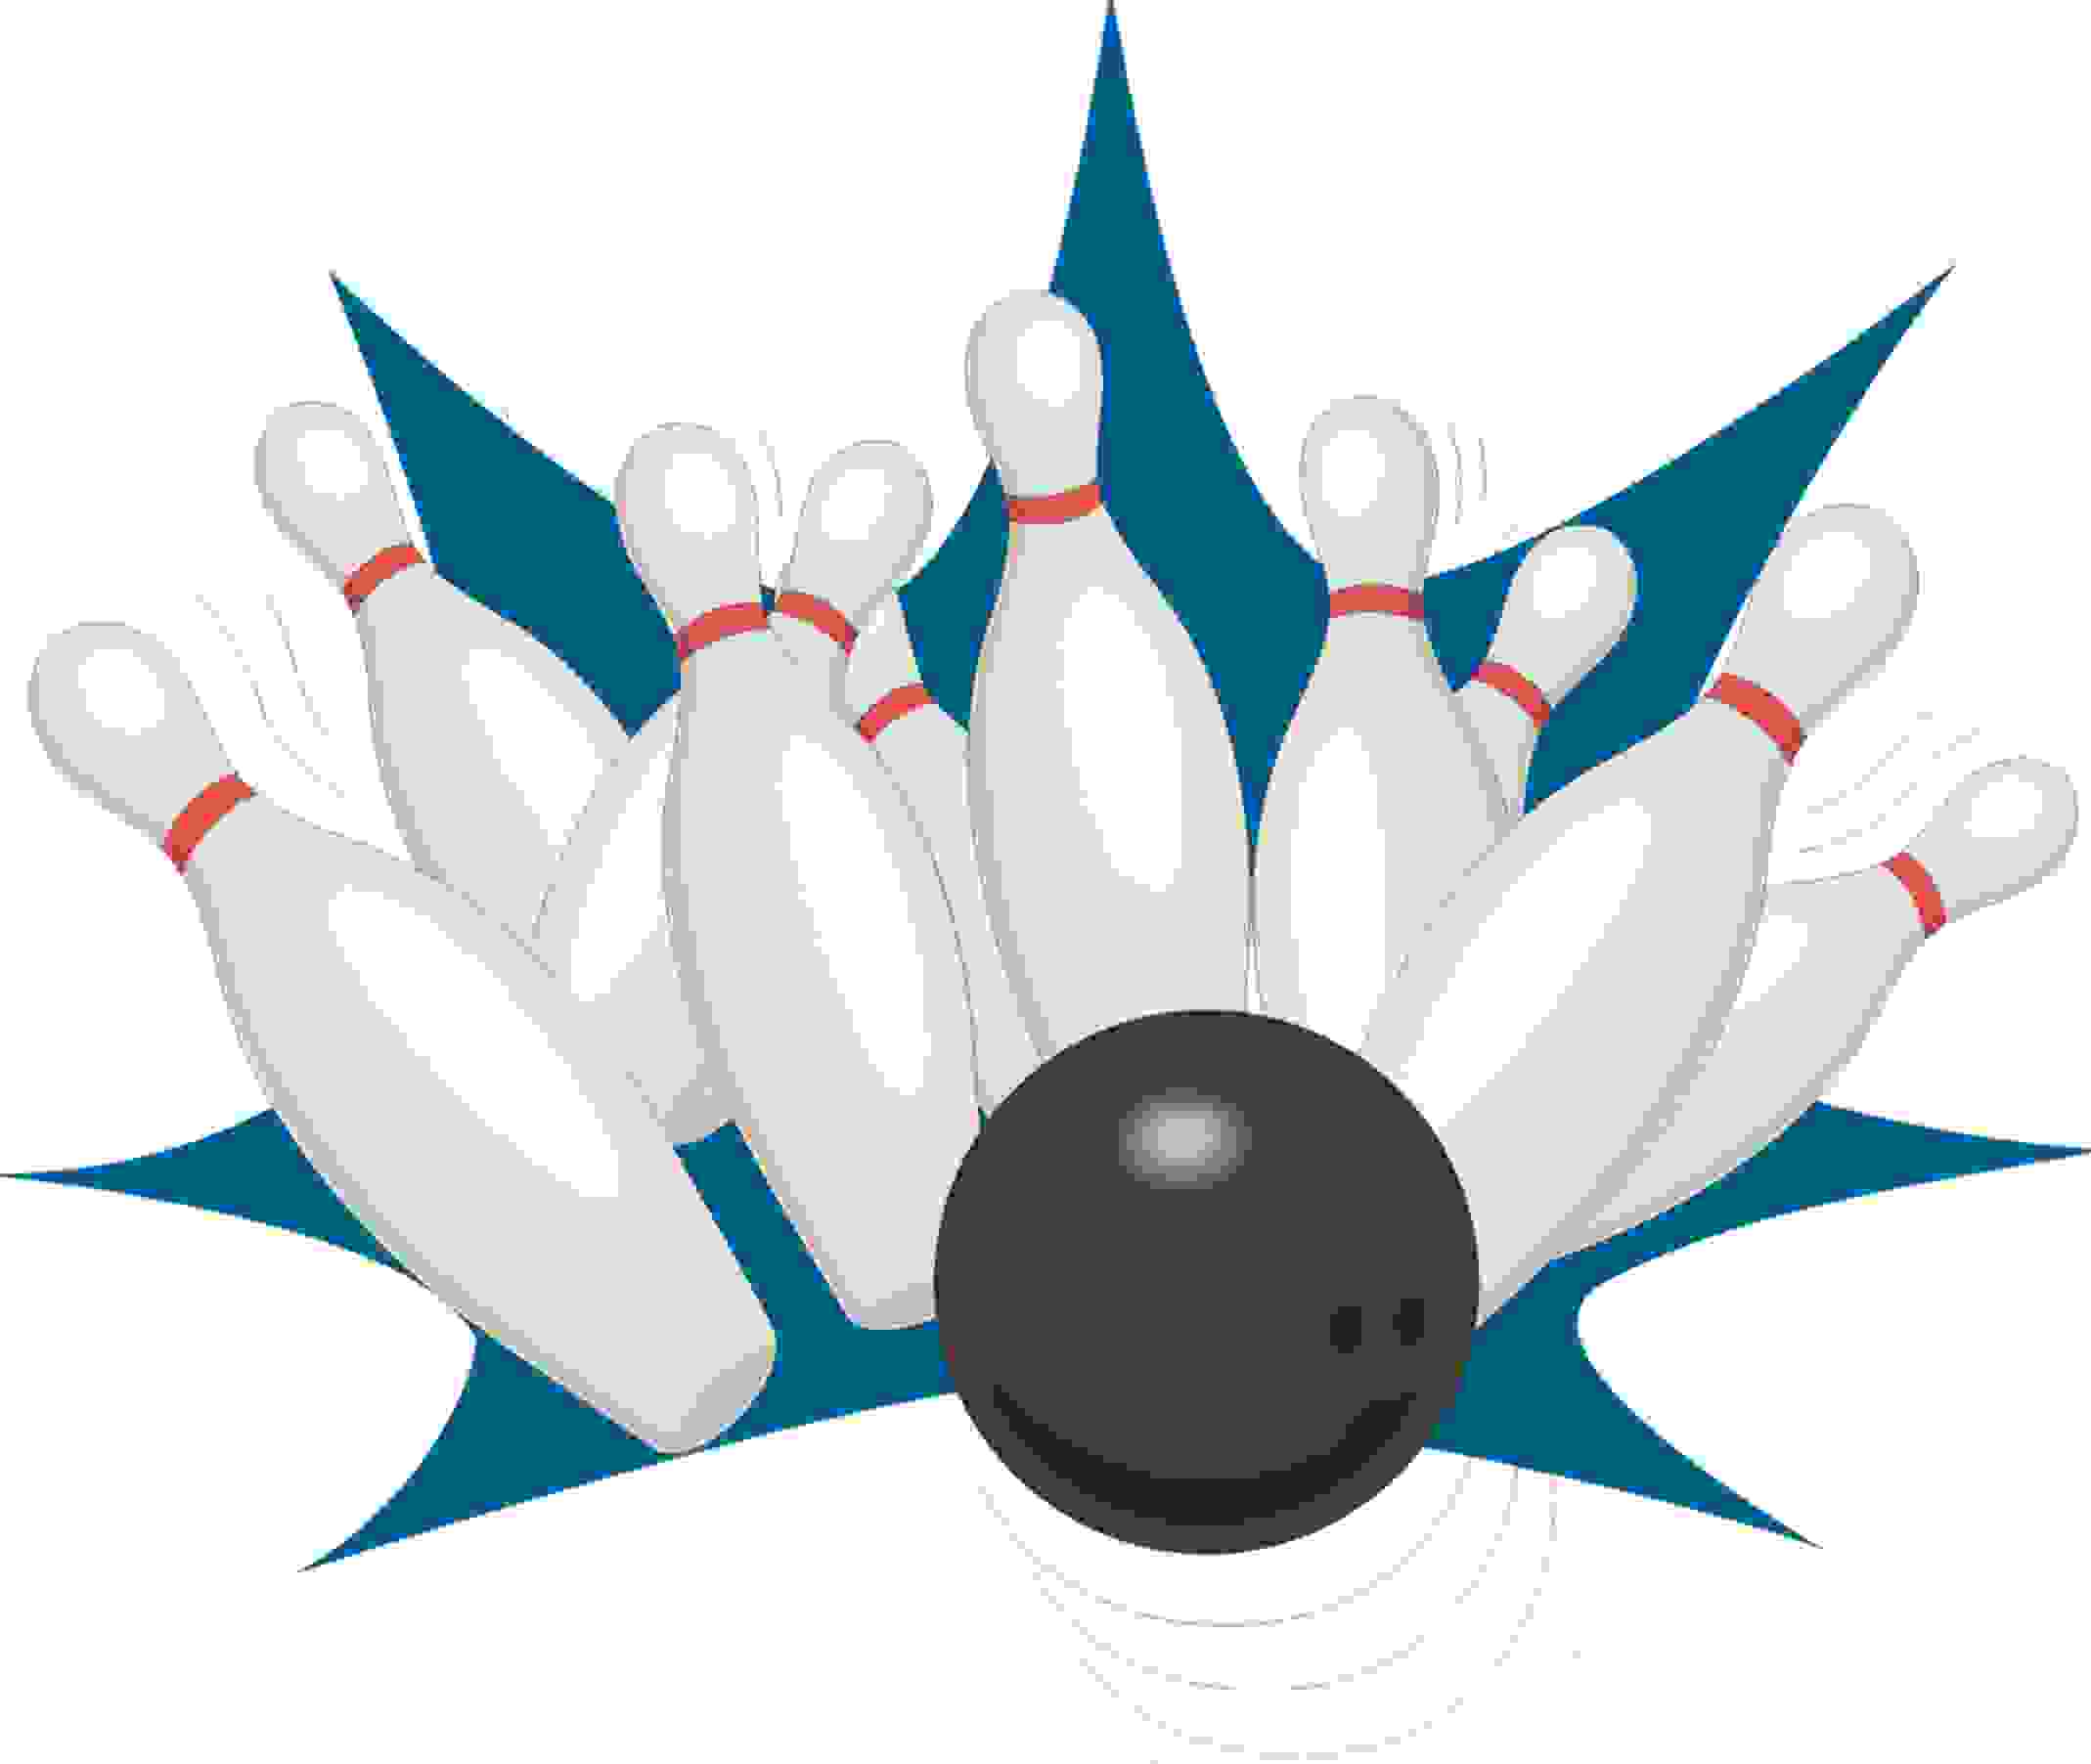 bowling kegel - group picture, image by tag - keywordpictures ...